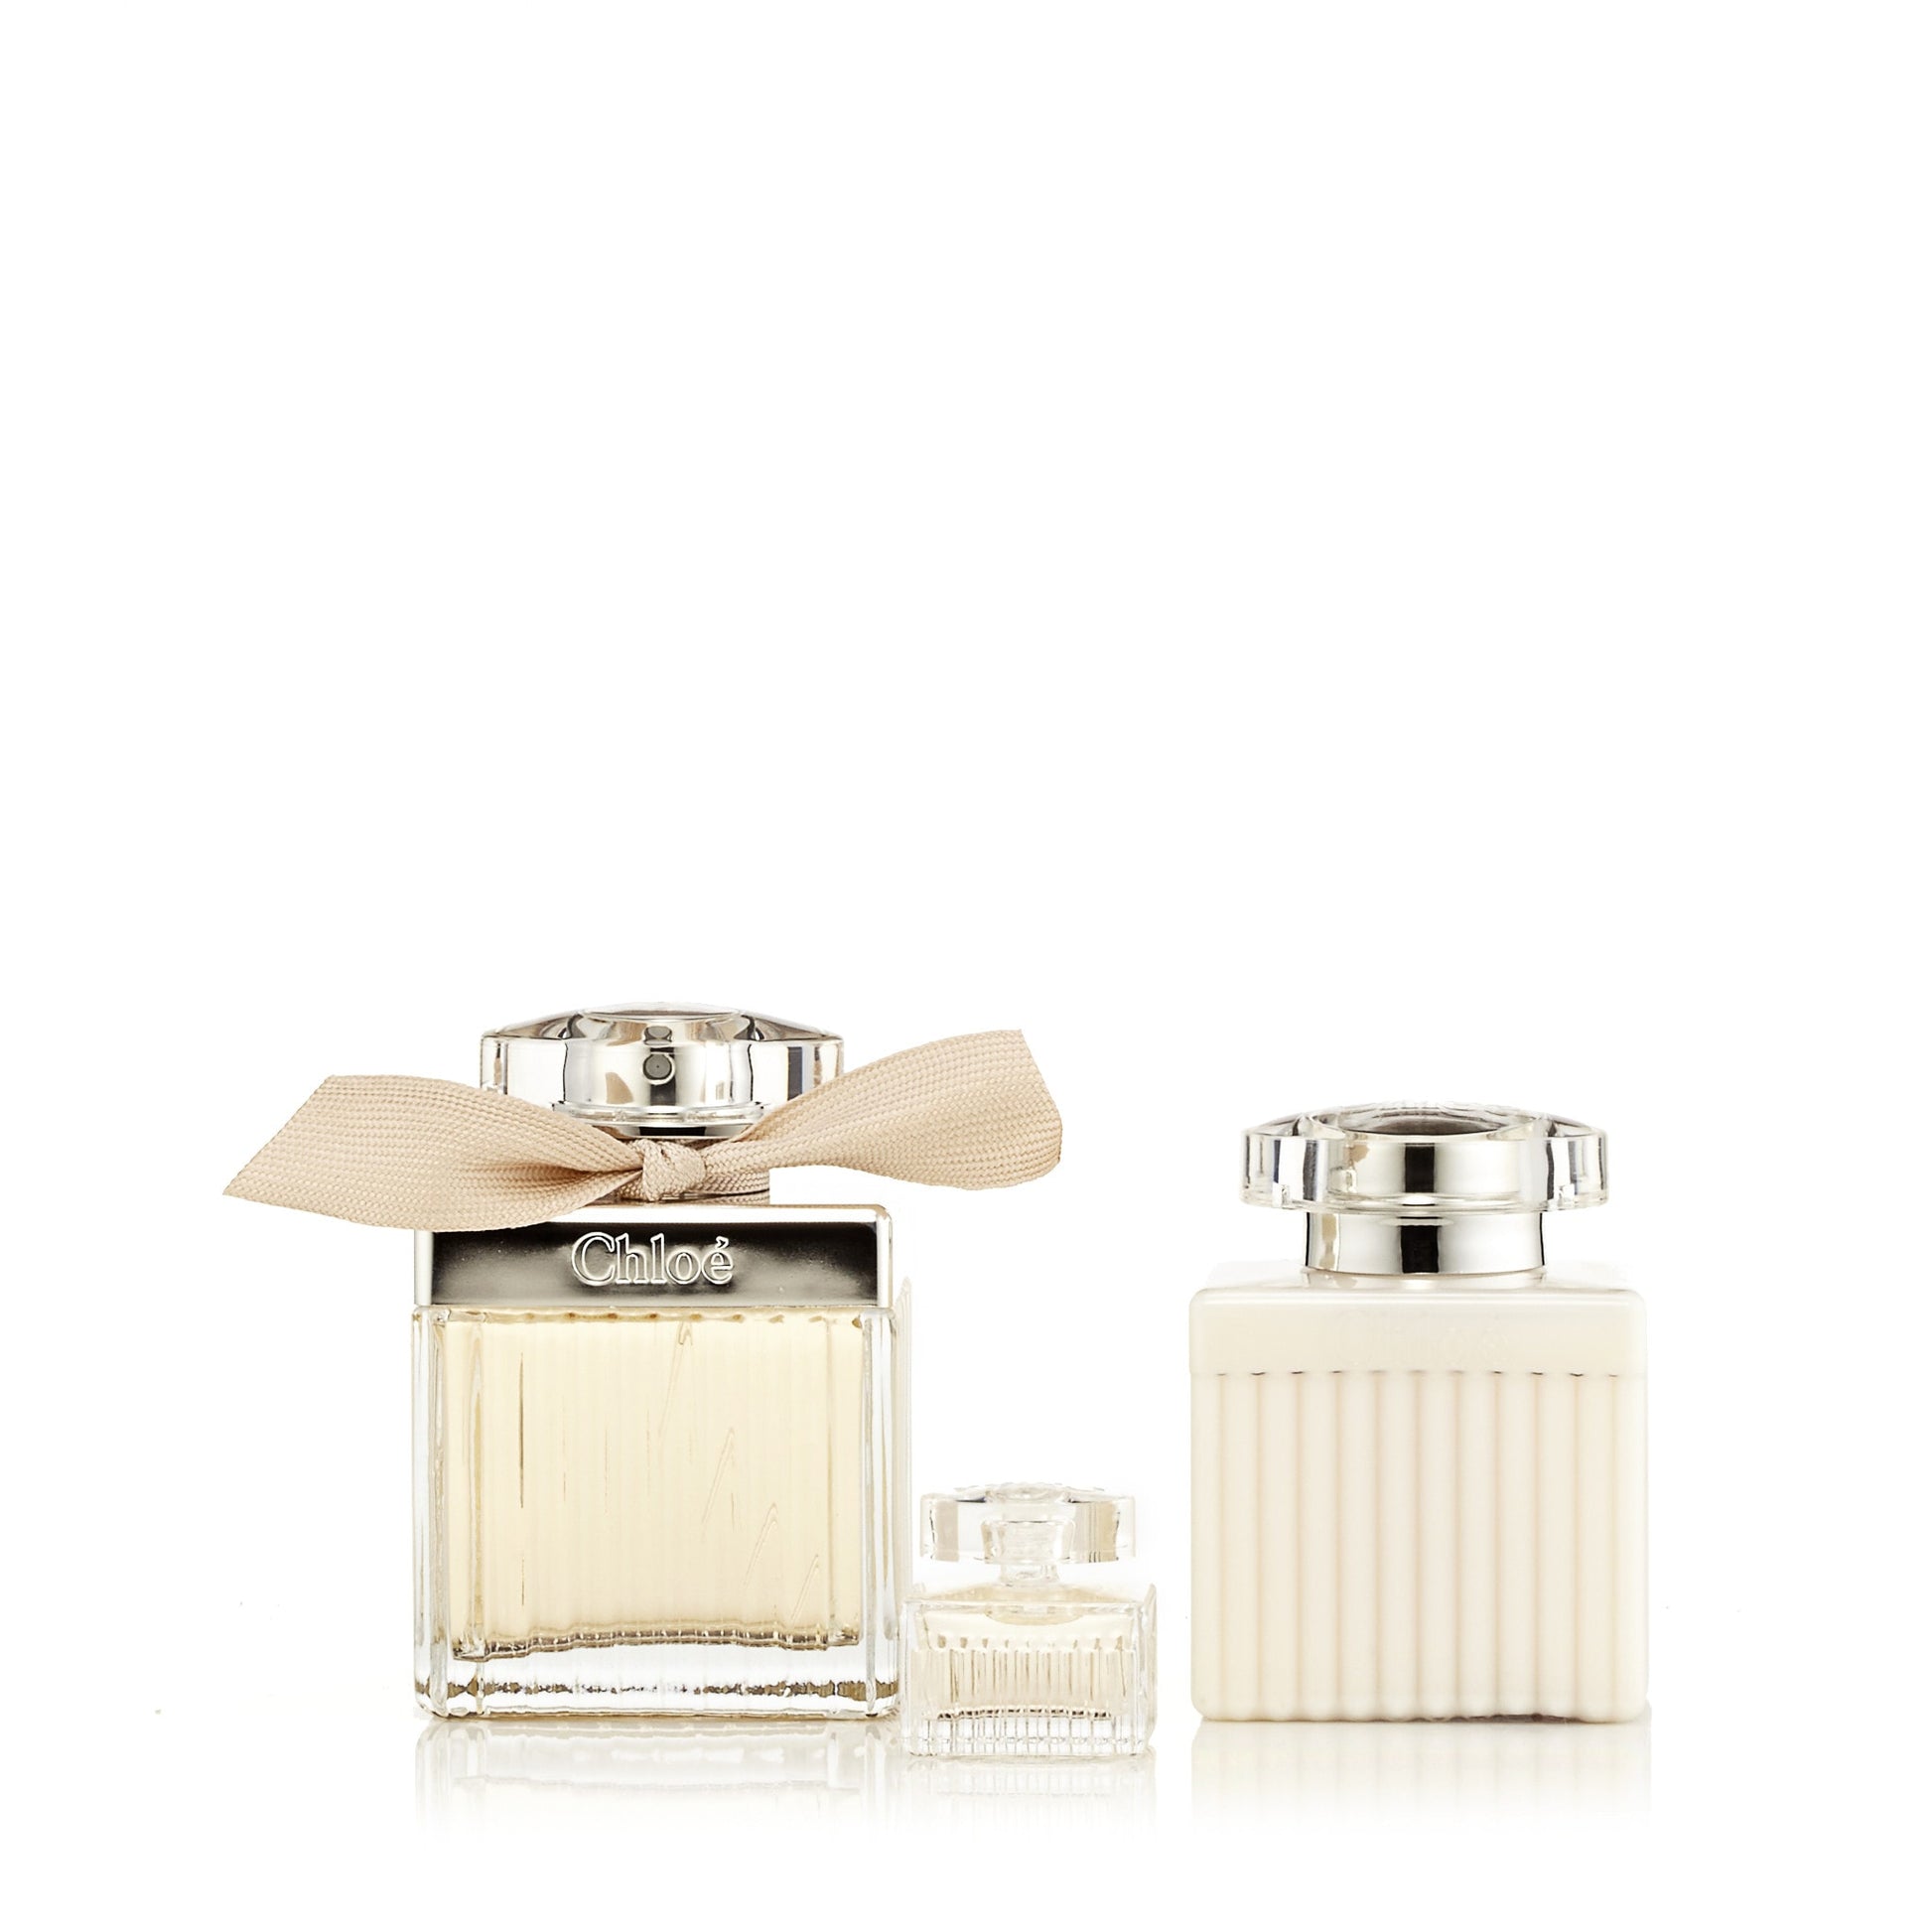 Chloe Gift Set for Women by Chloe, Product image 1